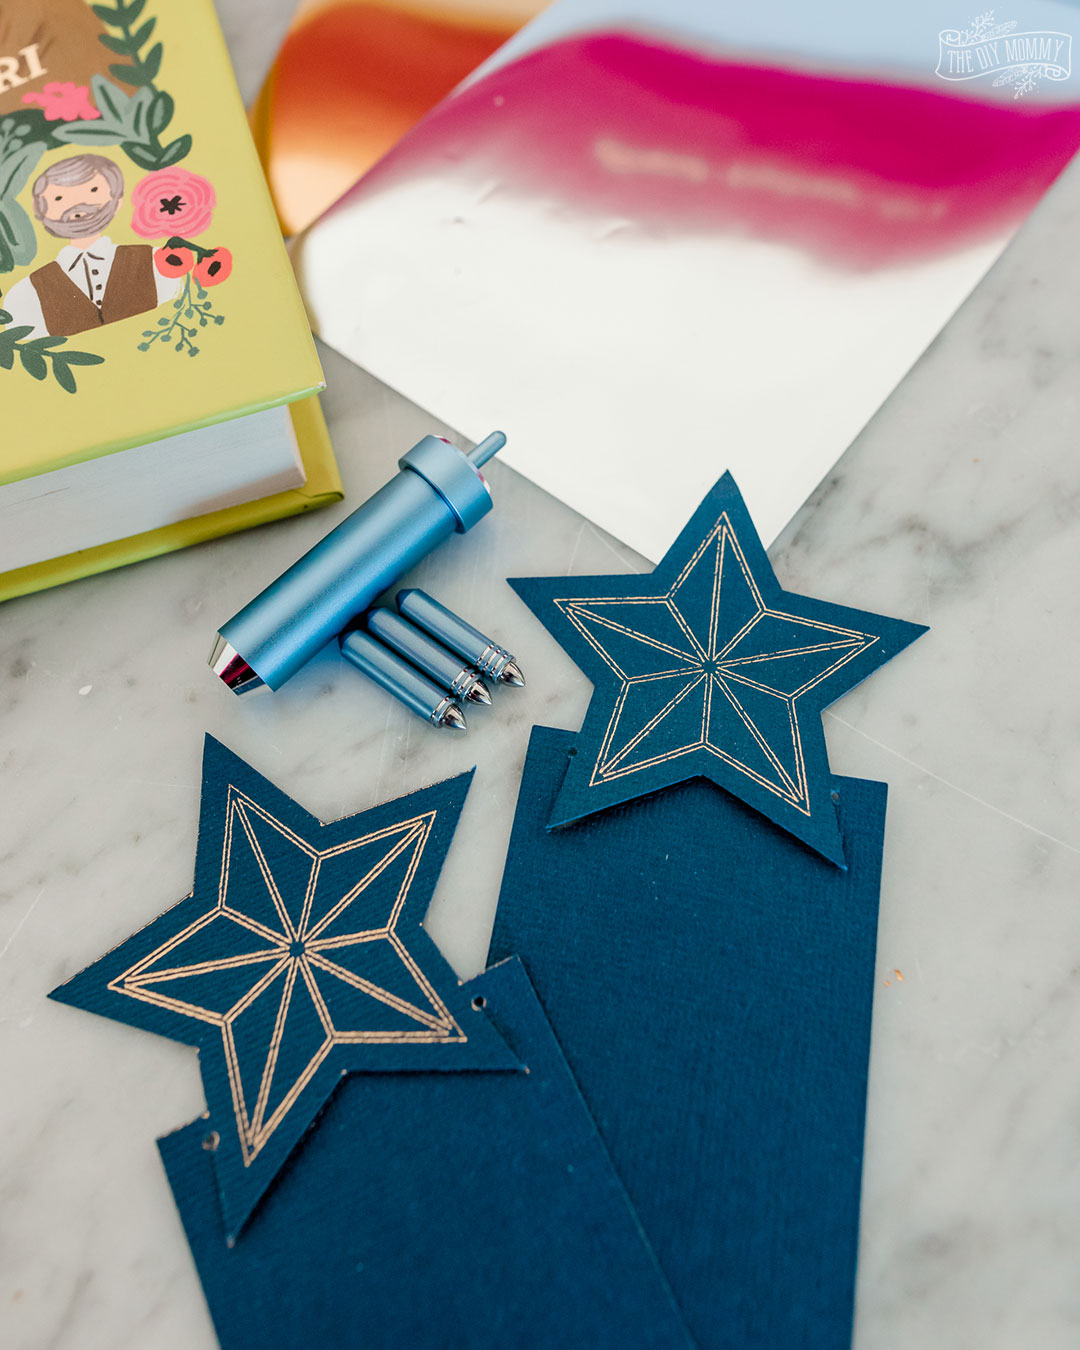 The new Cricut Foil Transfer system adds foil effects to paper, faux leather and more!